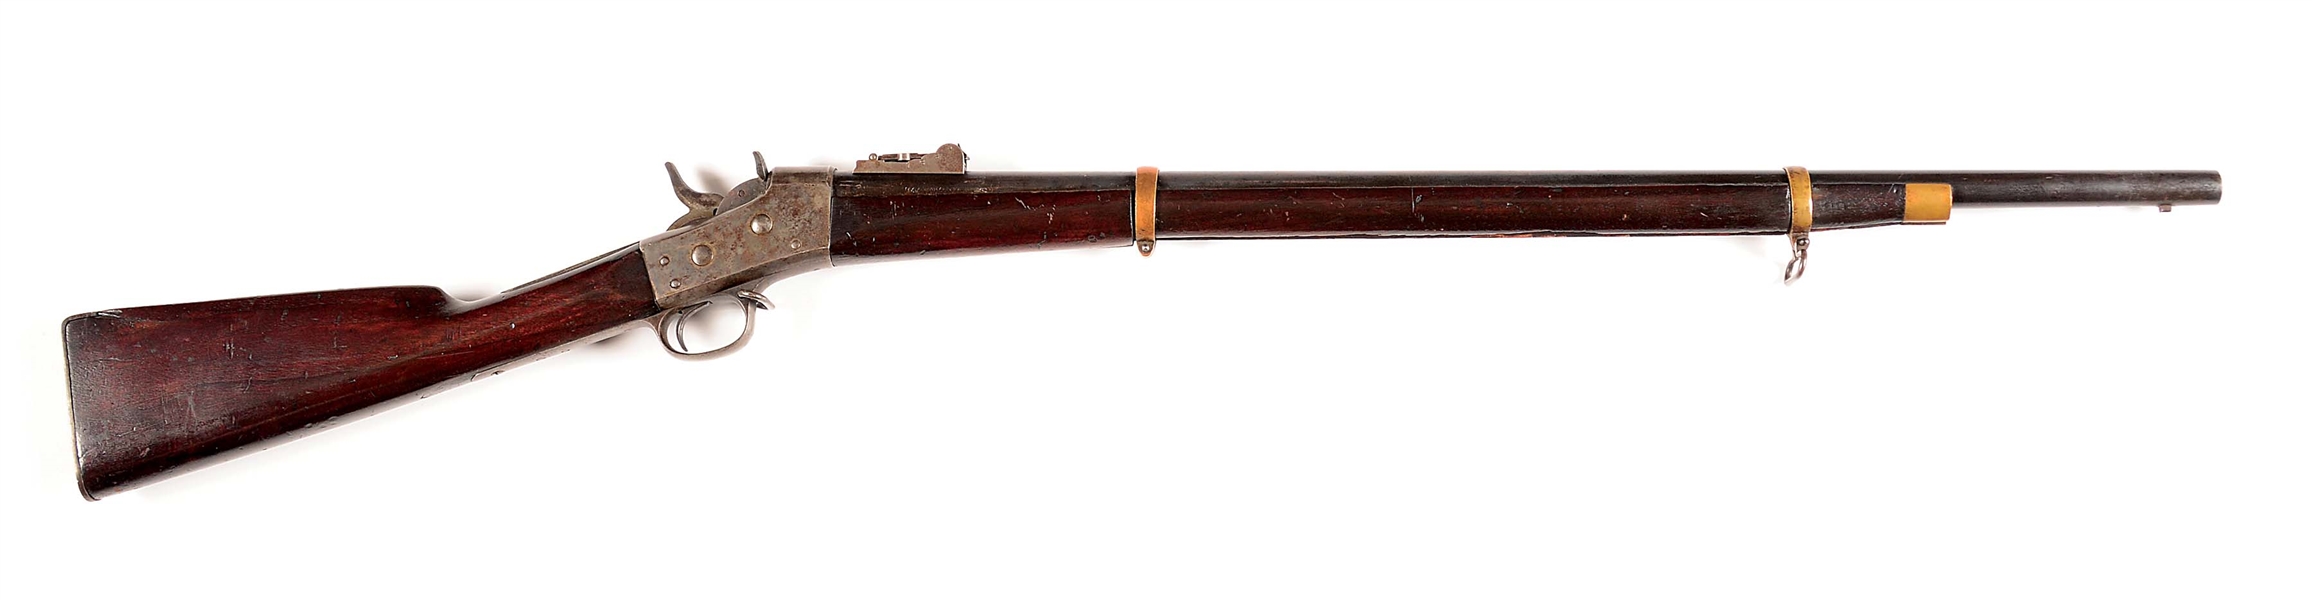 (A) TYPE 1 TRANSFORMED REMINGTON ROLLING BLOCK RIFLE APPEARING TO BE CONVERTED FROM A CONFEDERATE GILLAM AND MILLER RIFLED MUSKET.